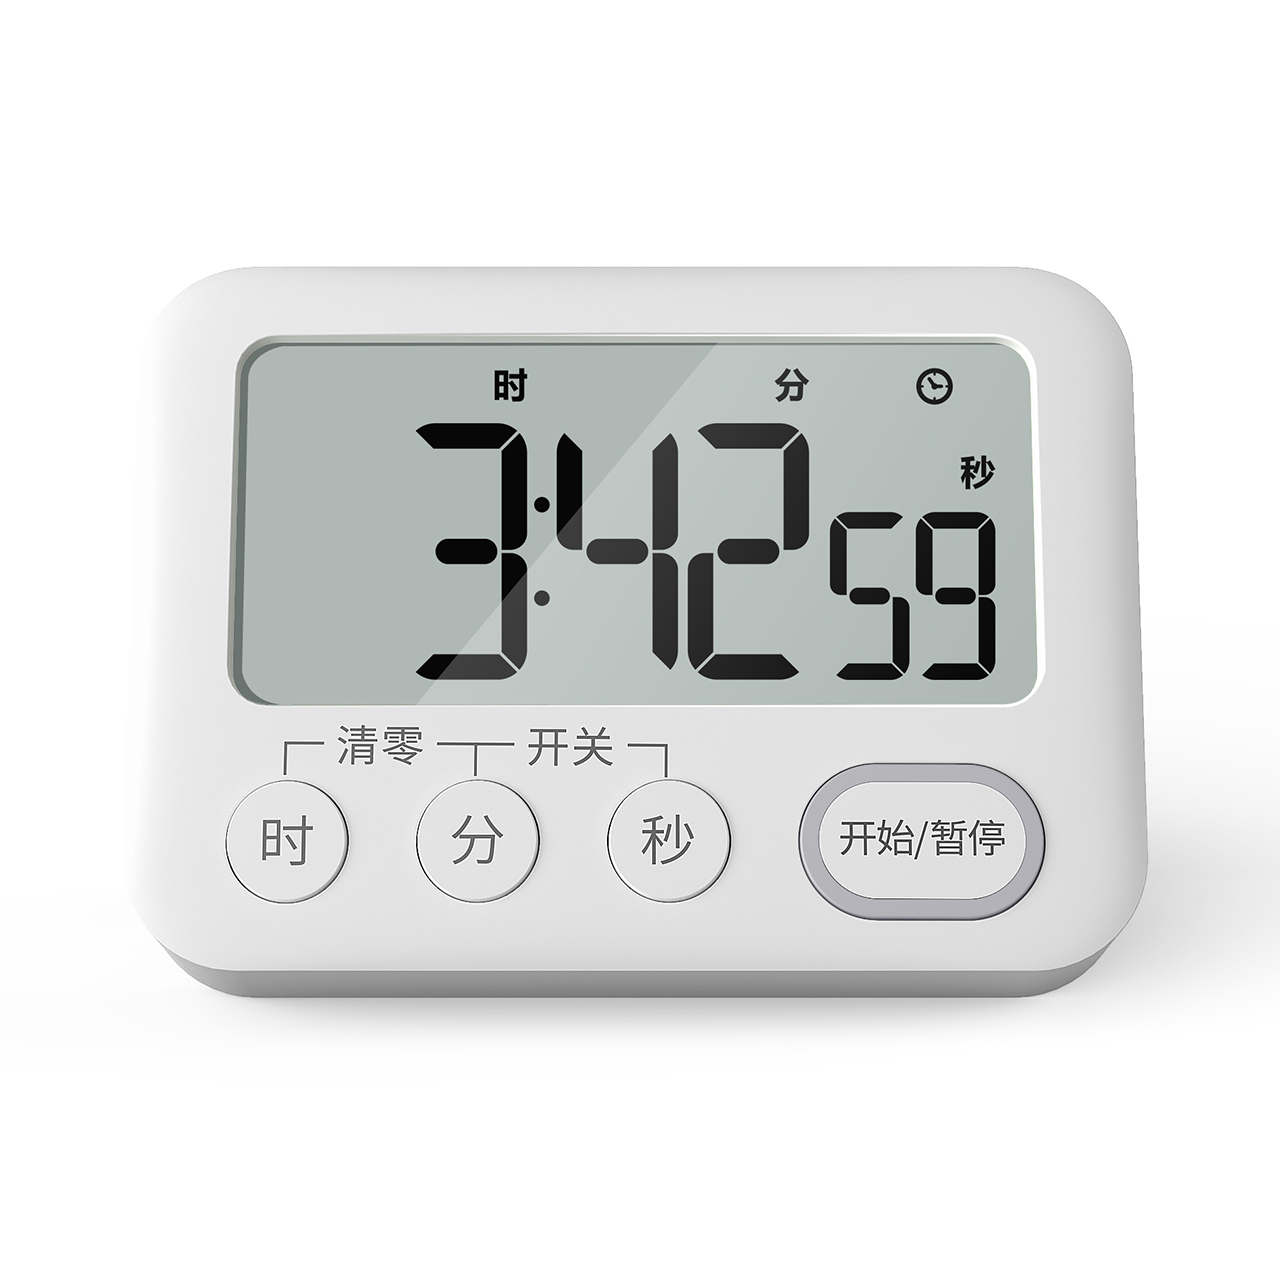 Timer Digital Timer Large Screen Timer Kitchen Timer Countdown Clock with Loud Volume Alarm Function with Magnet Small White